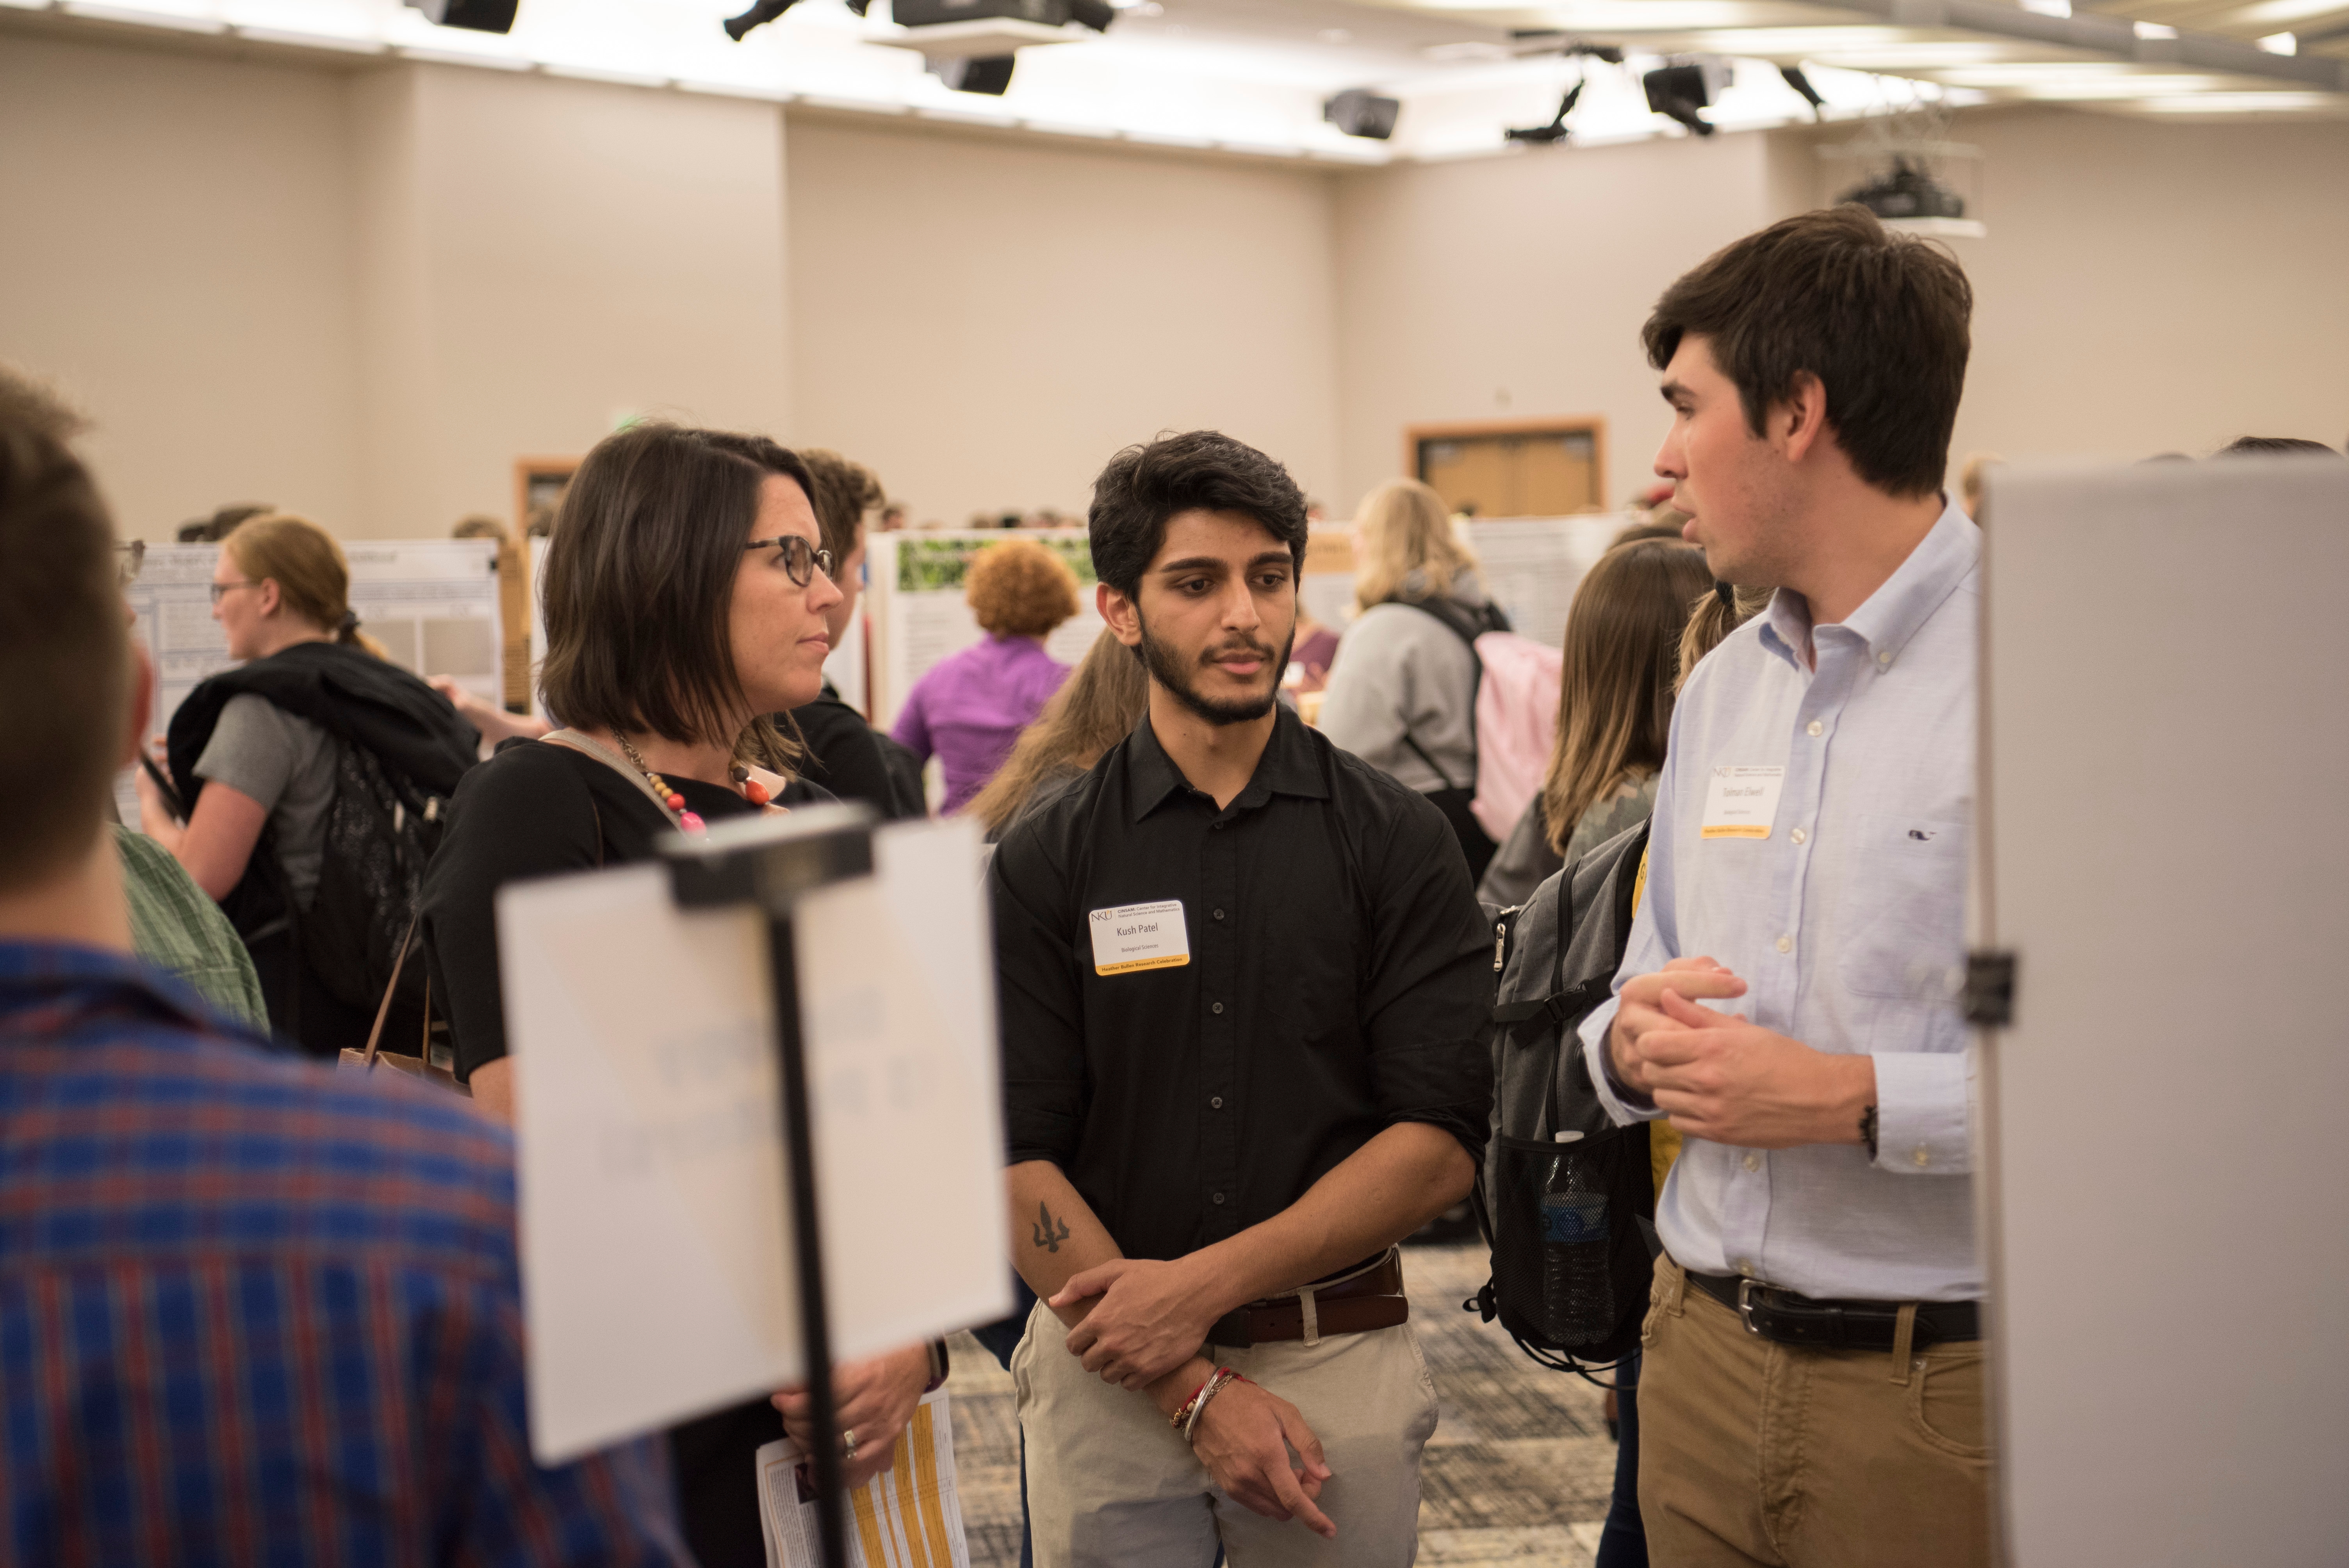 Students and Faculty at a poster session